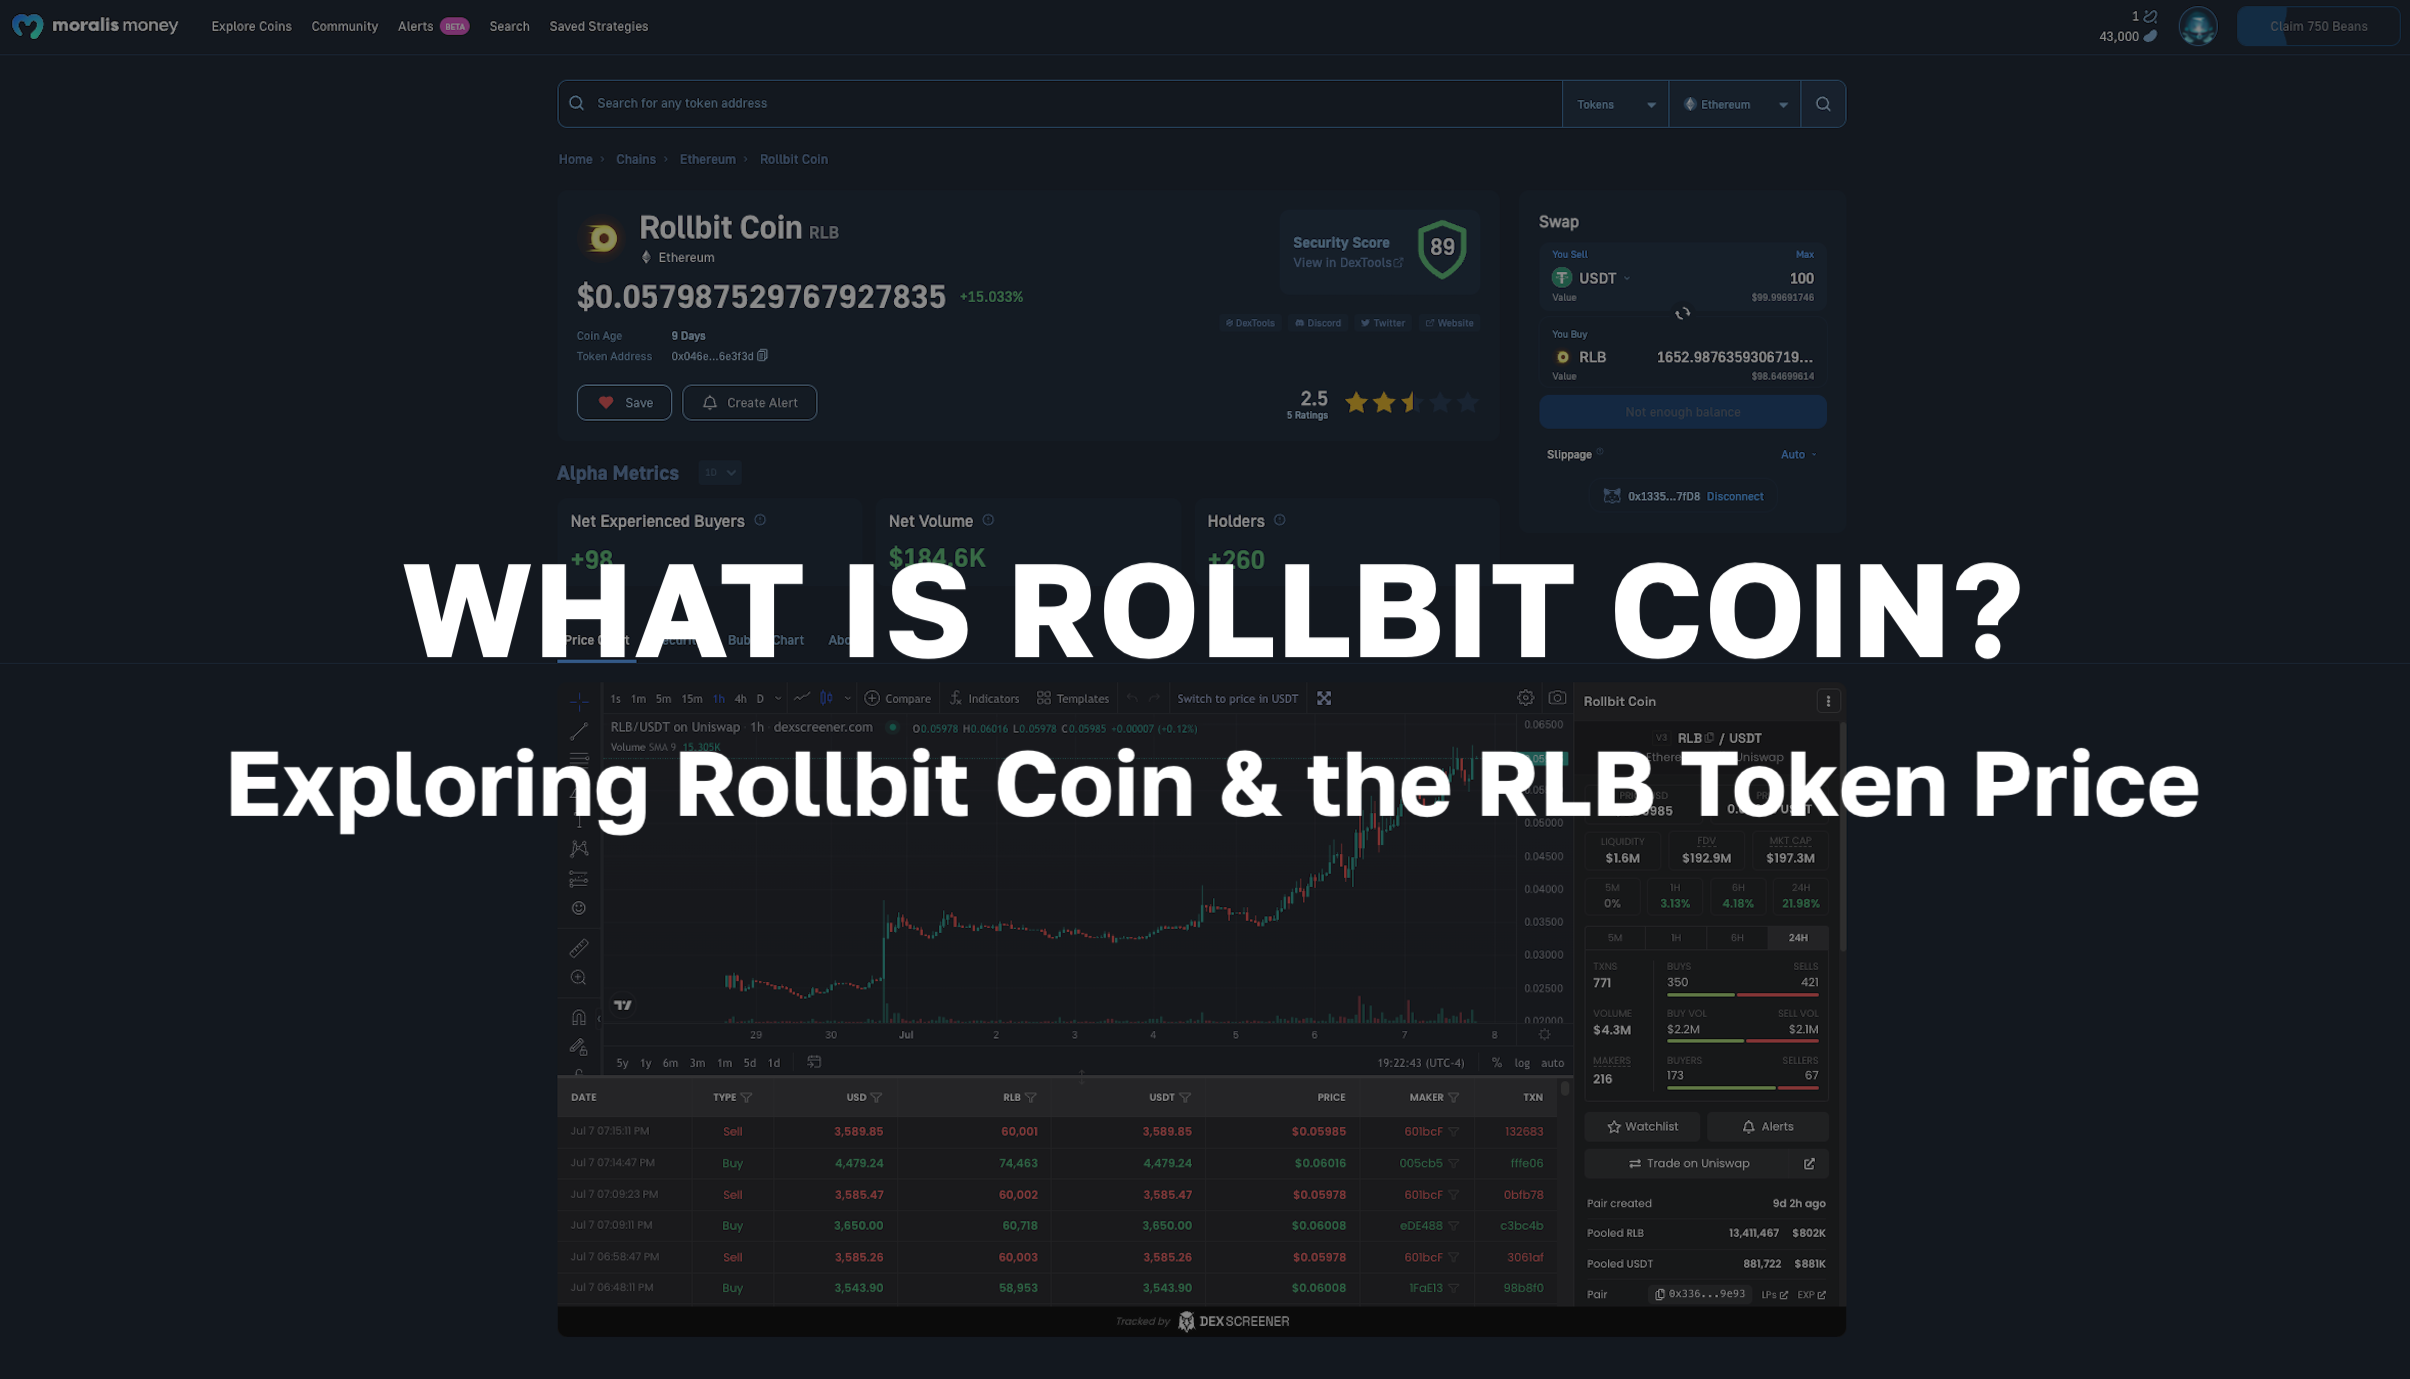 Exploring the Rollbit Coin Project and the RLB Token Price